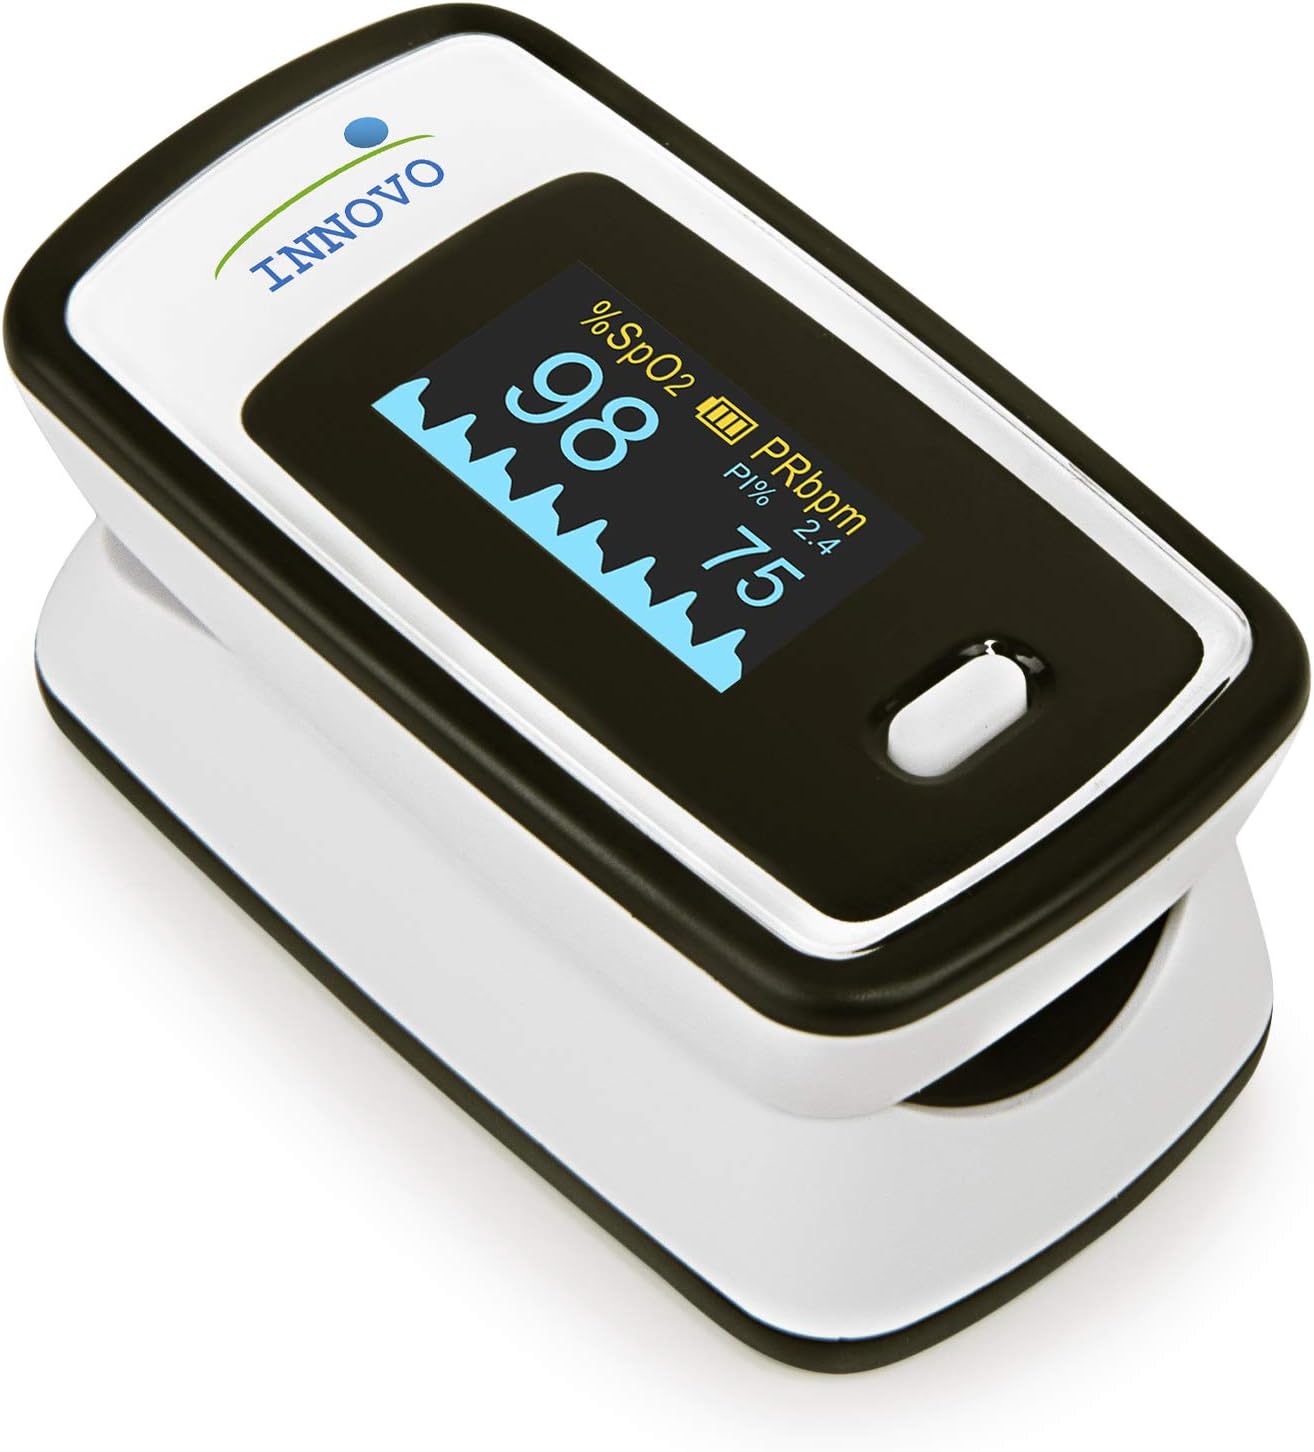 Innovo Deluxe iP900AP Fingertip Pulse Oximeter with [...]